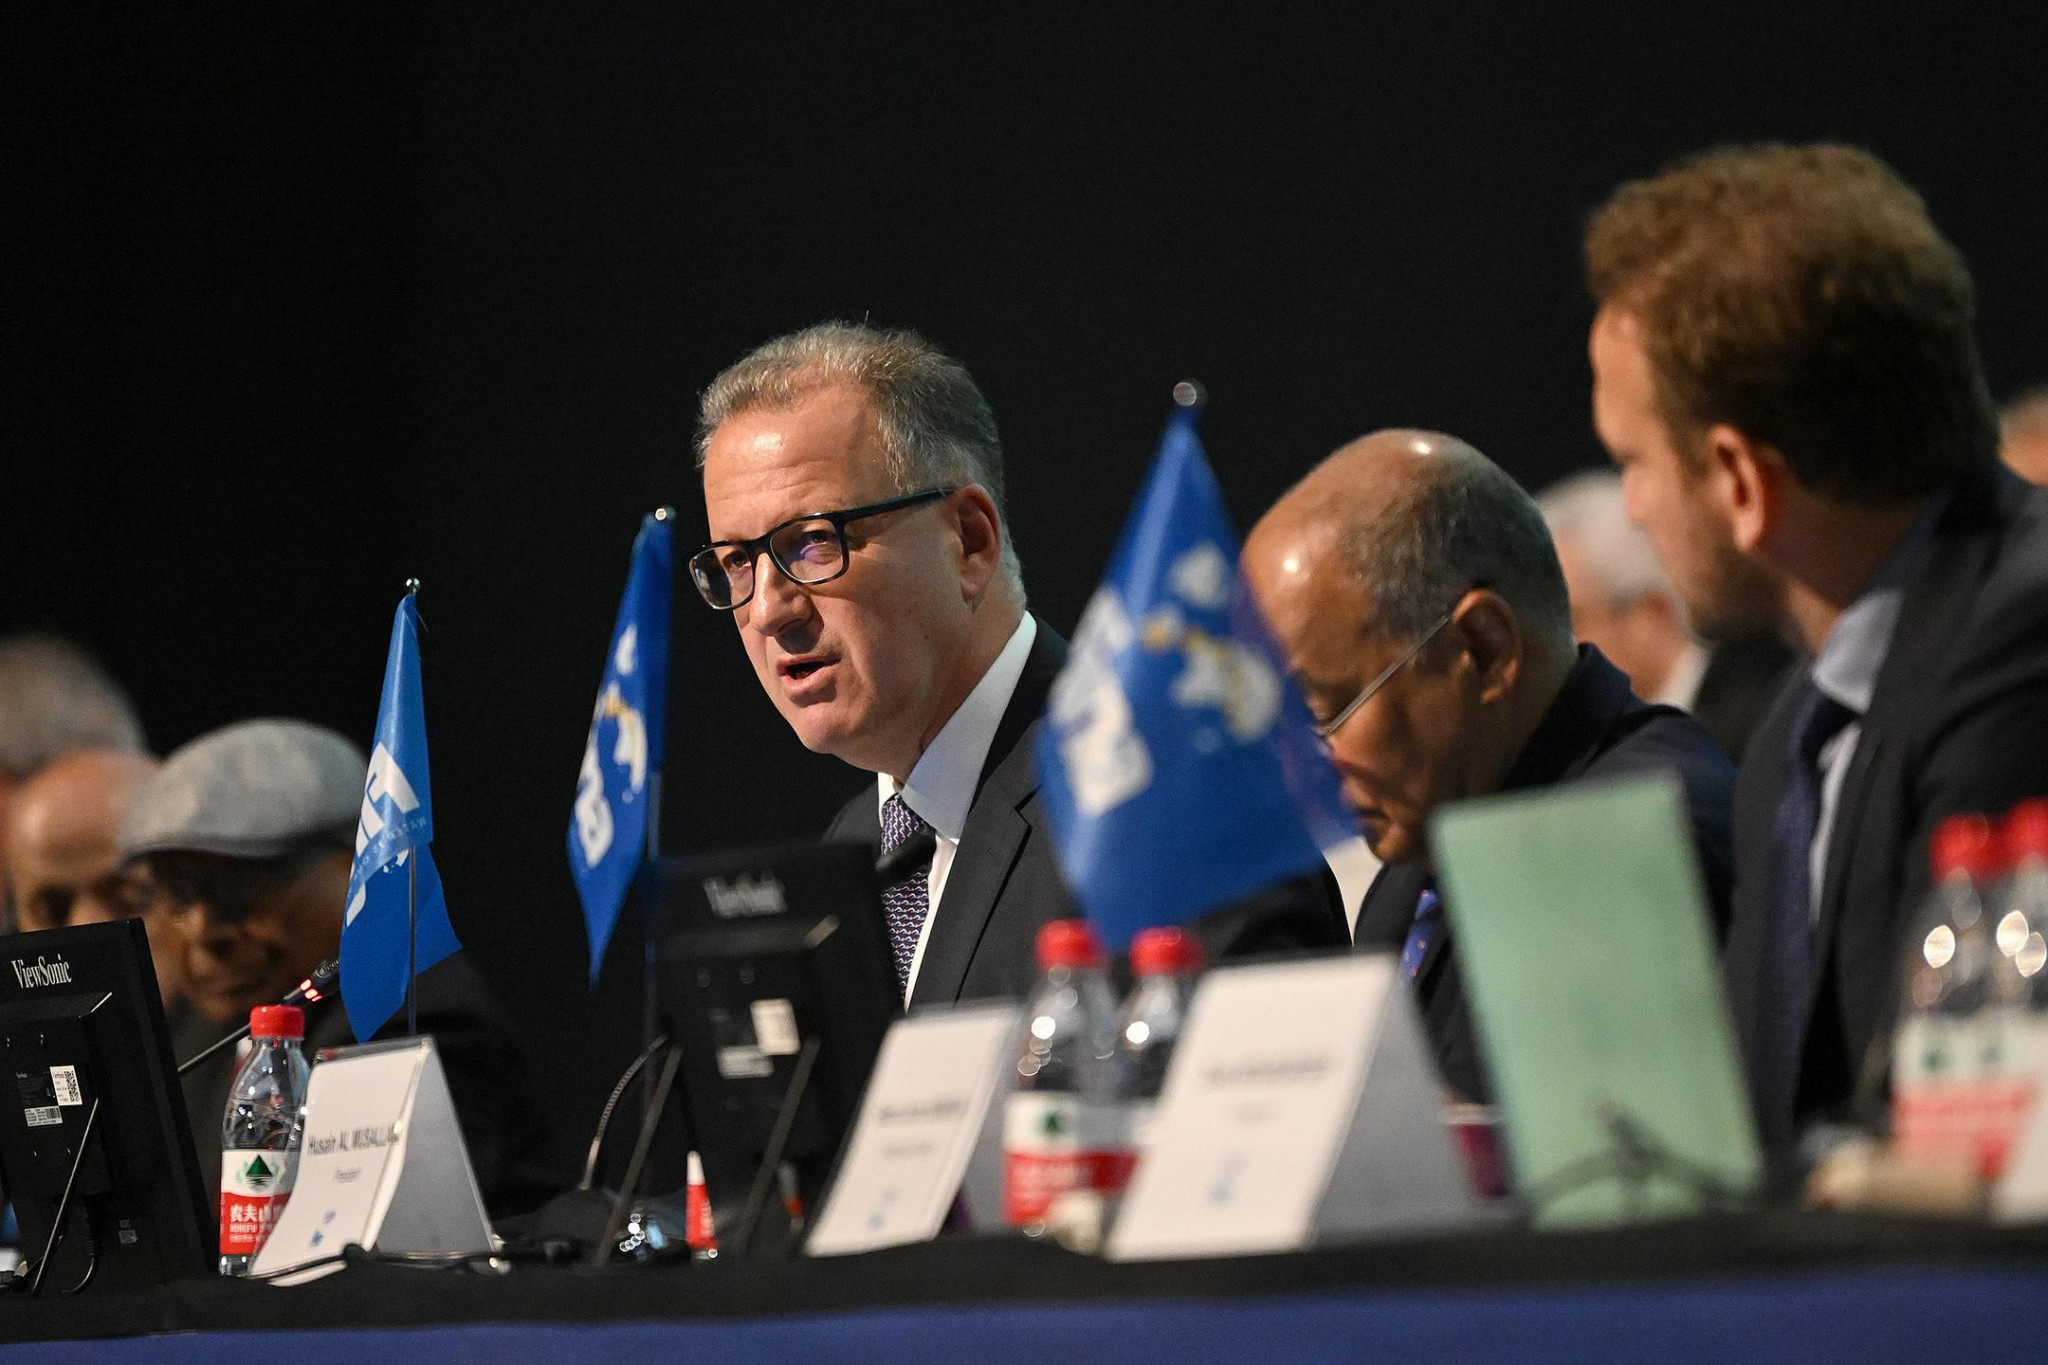 Michele Bernasconi, chair of FINA's Reform Committee, outlined the key changes to the organisation's constitution ©FINA